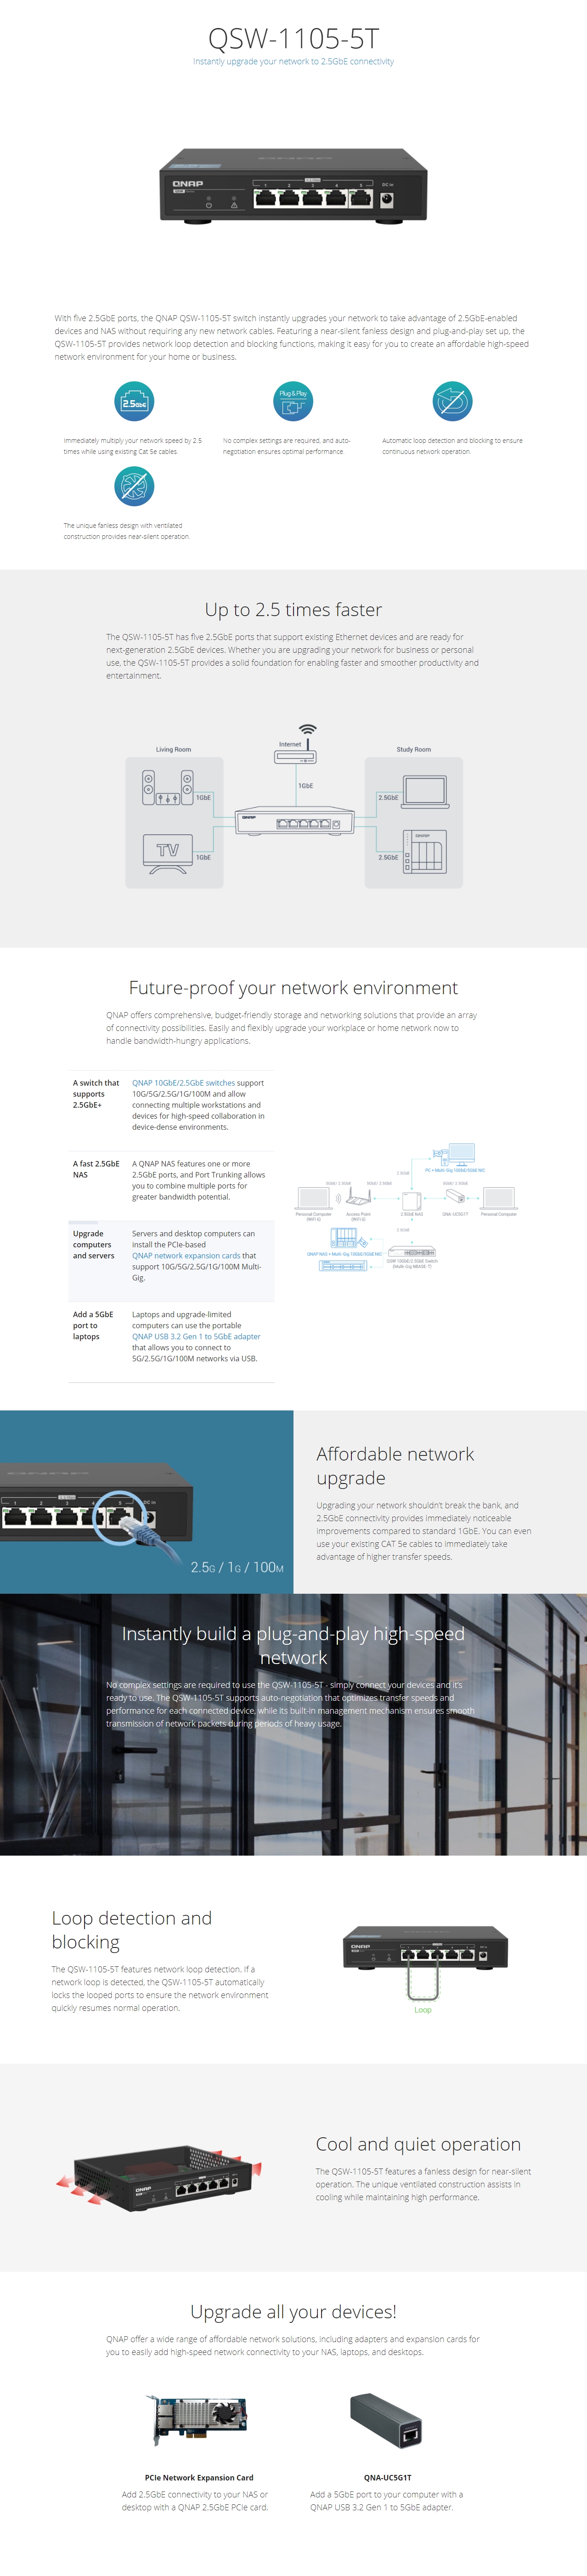 A large marketing image providing additional information about the product QNAP QSW-1105-5T 5 Port 2.5GbE Unmanaged Switch - Additional alt info not provided